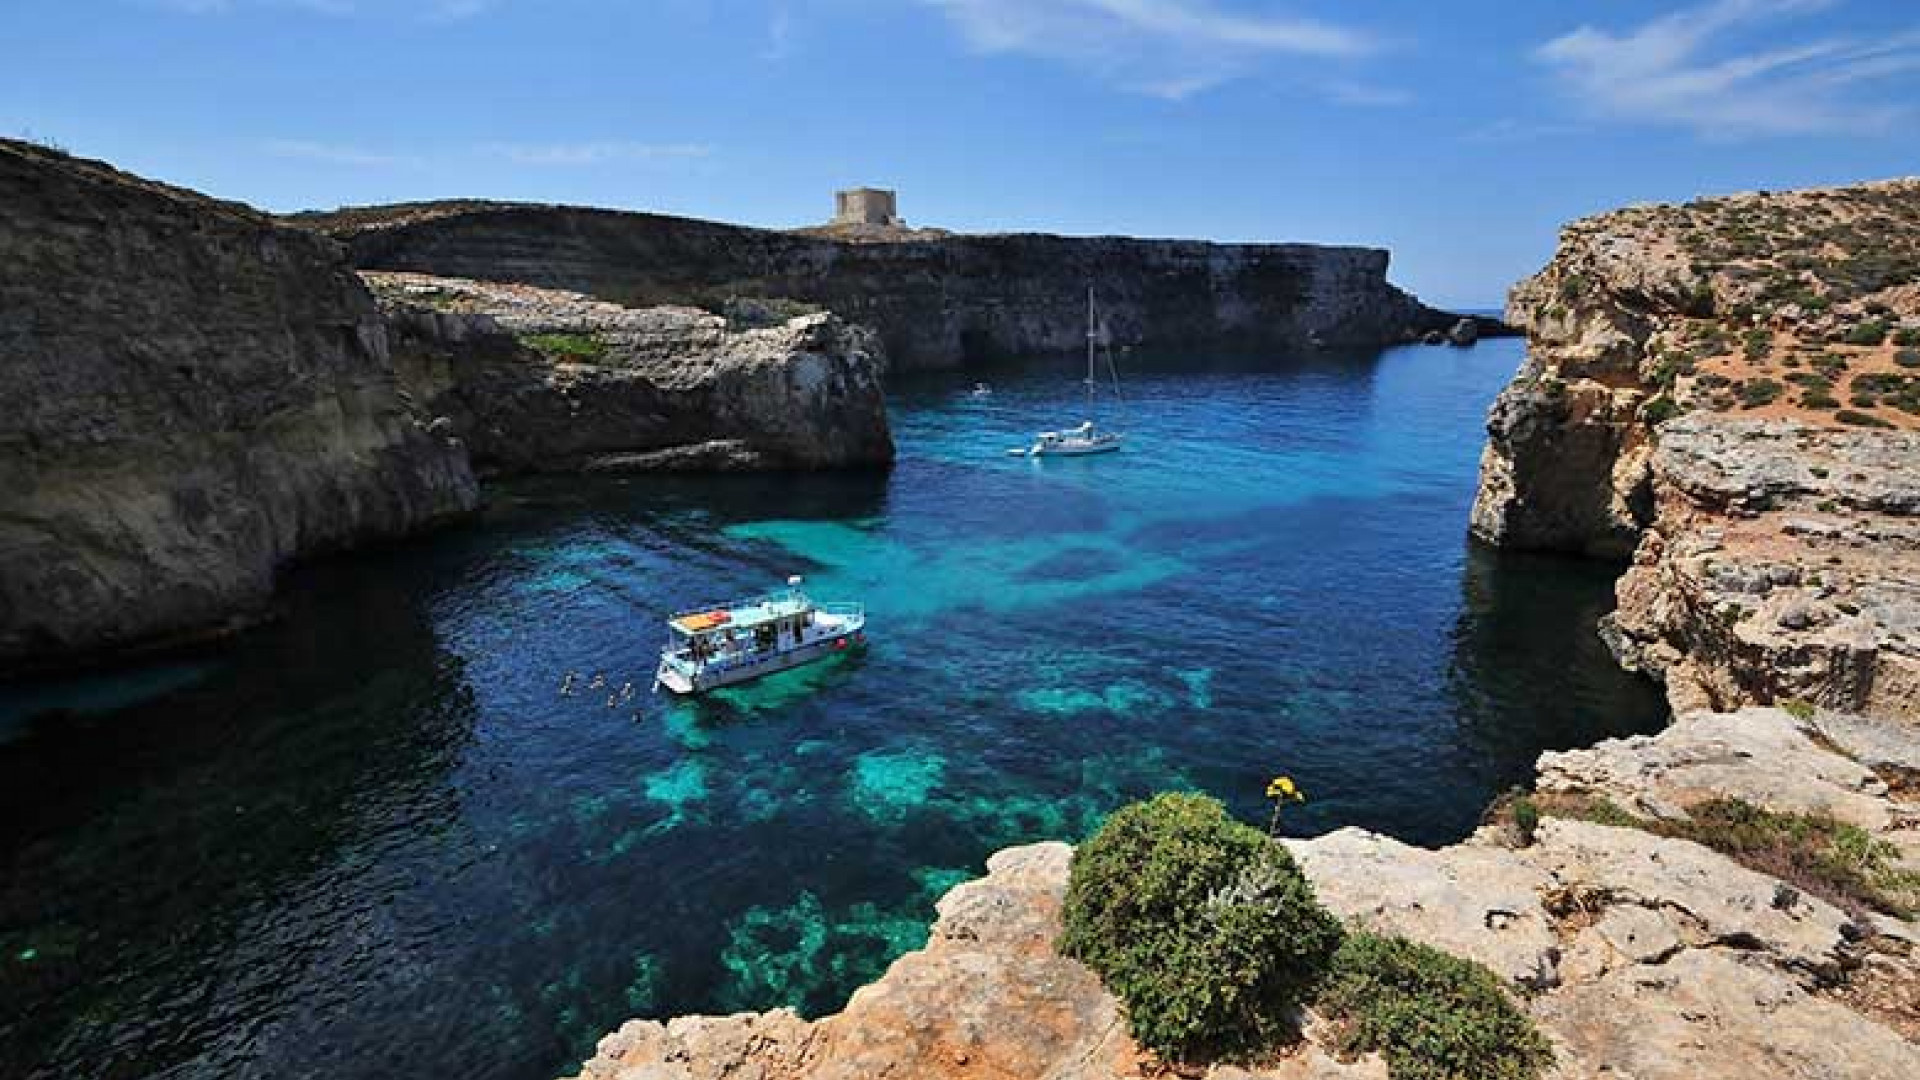 Focus on Gozo, Escapism, Tranquil beauty, Recharge and relax, 1920x1080 Full HD Desktop